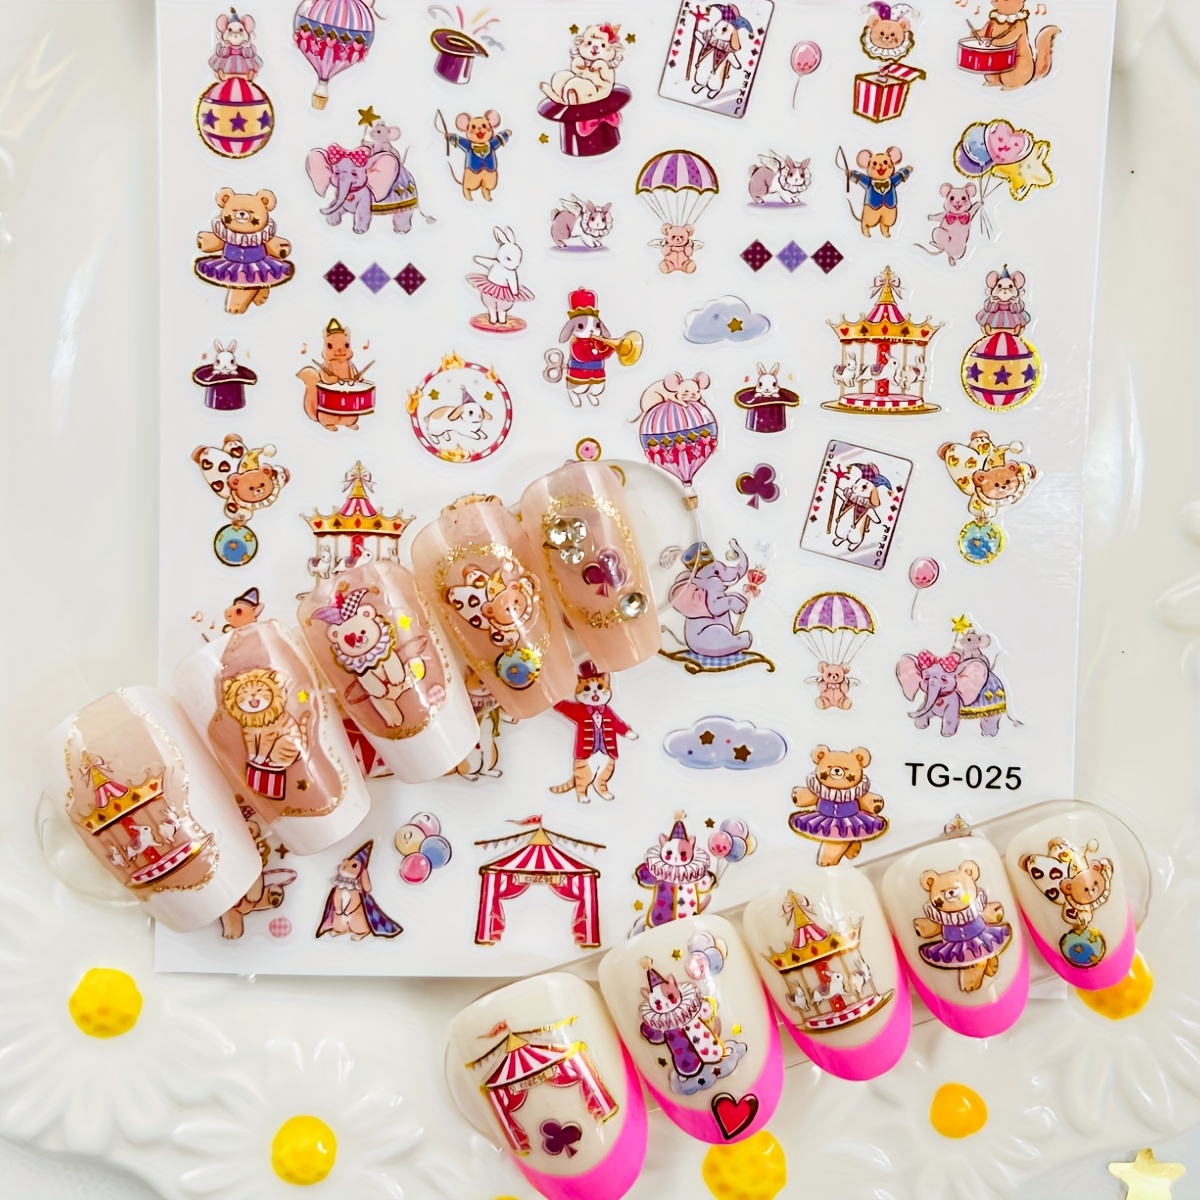 

Circus Themed Nail Art Stickers - Glitter Cartoon Animal Decals For Manicures, Pre-pasted Plastic Nail Embellishments, Single Use, Shimmery Irregular Shape, Elephant Bear Design, Unscented, Tg-025